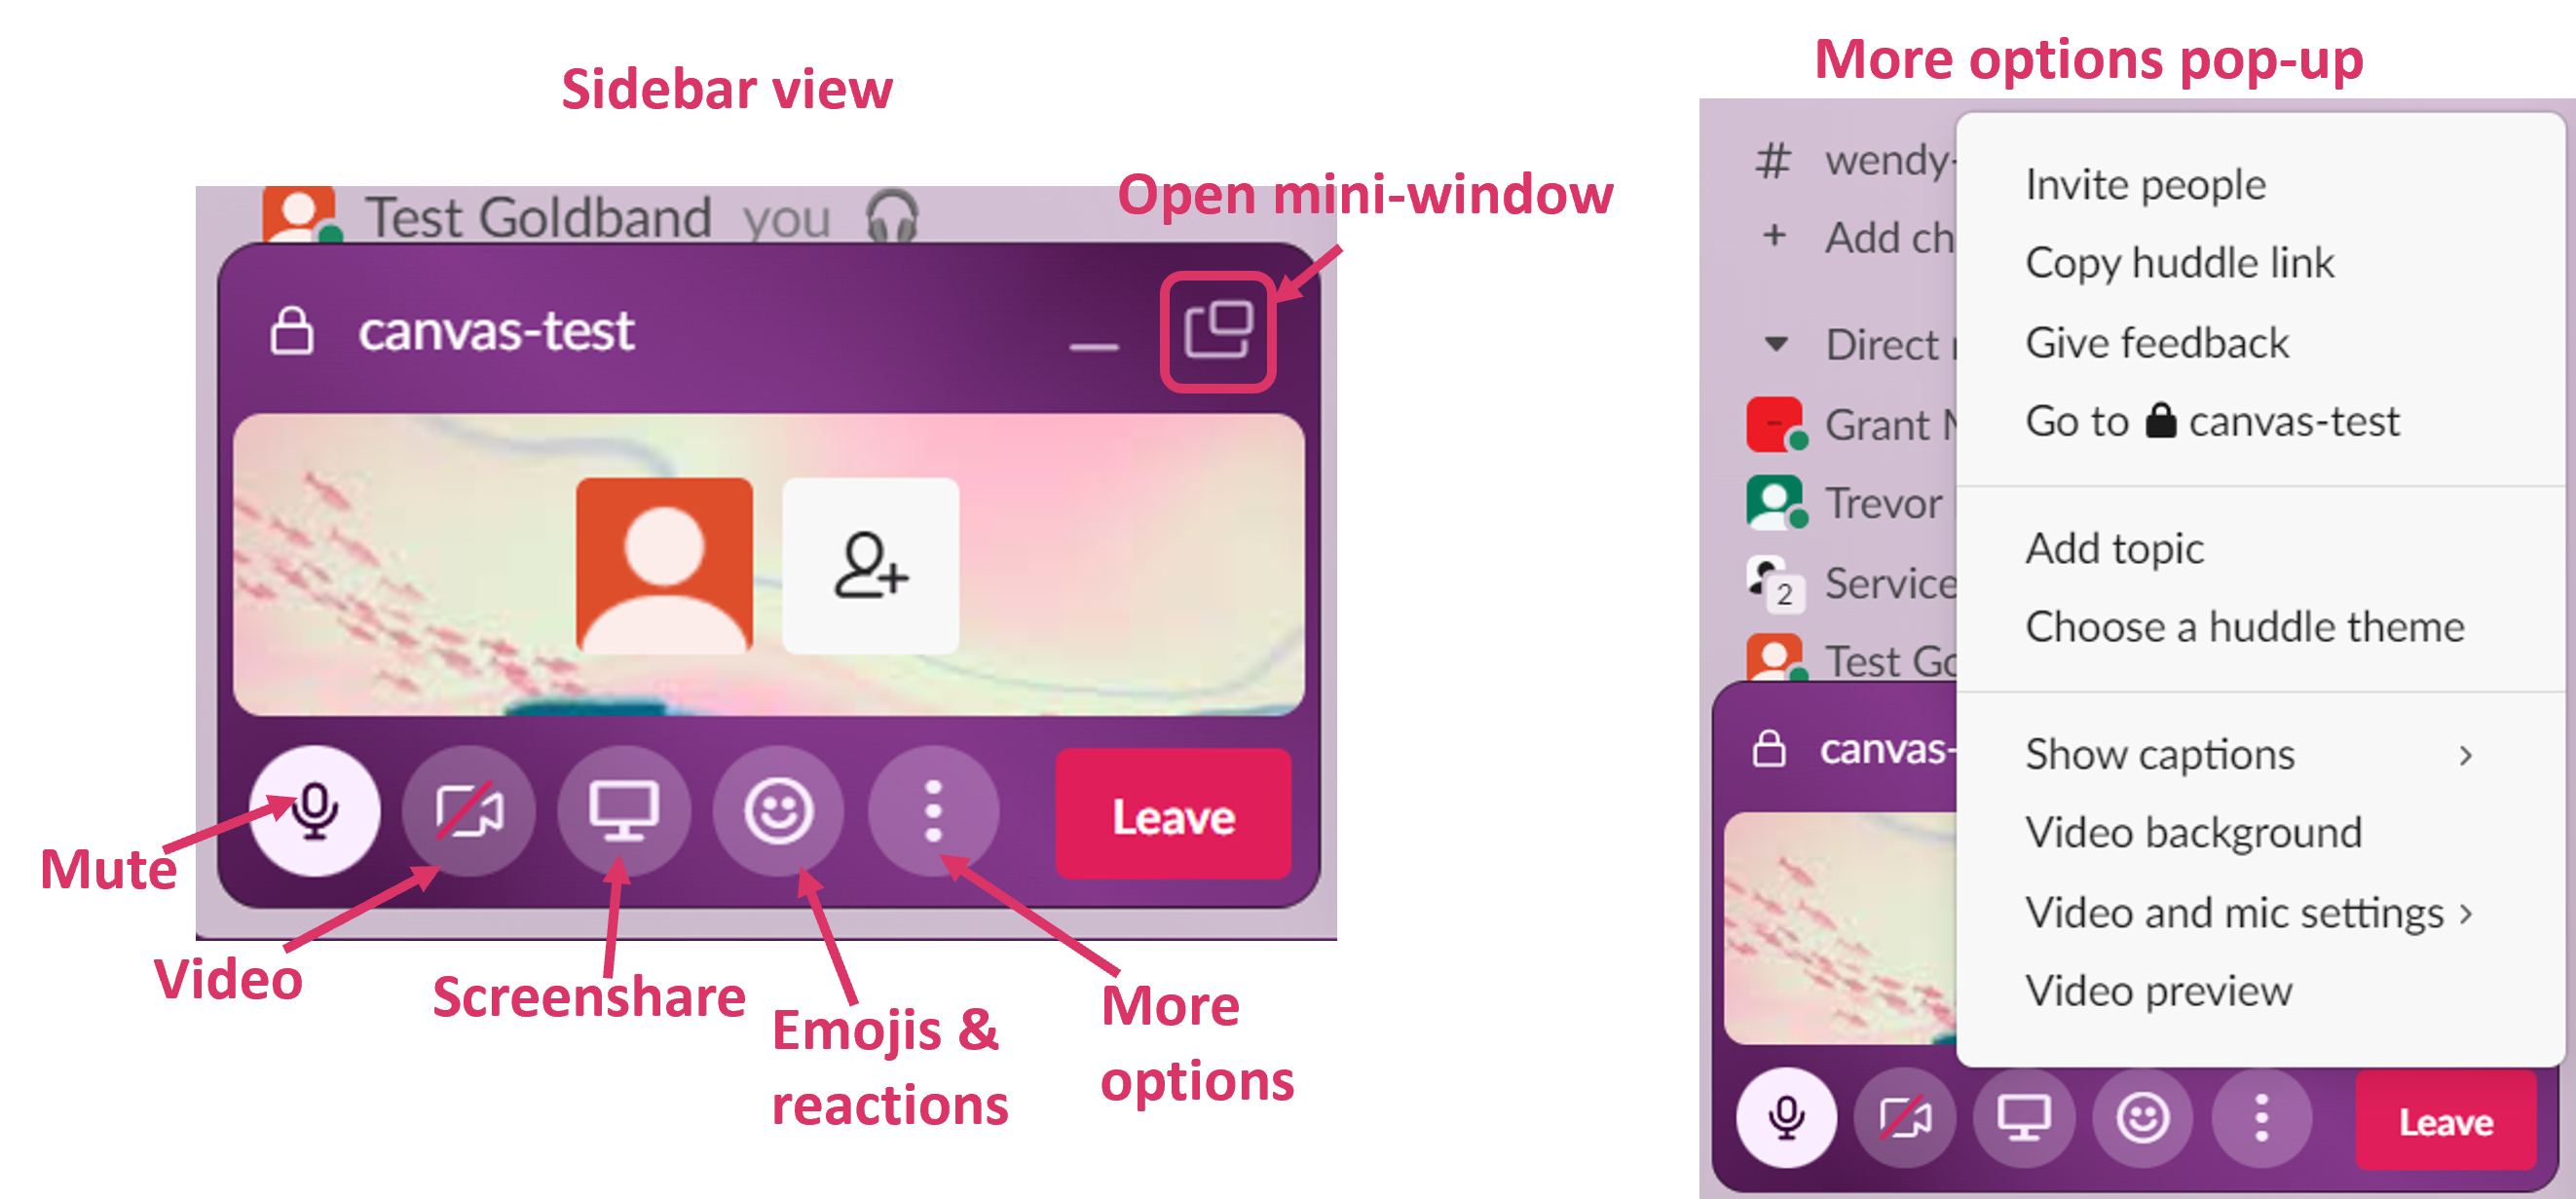 sidebar view with all the buttons toolbar and More options popup with Invite people command